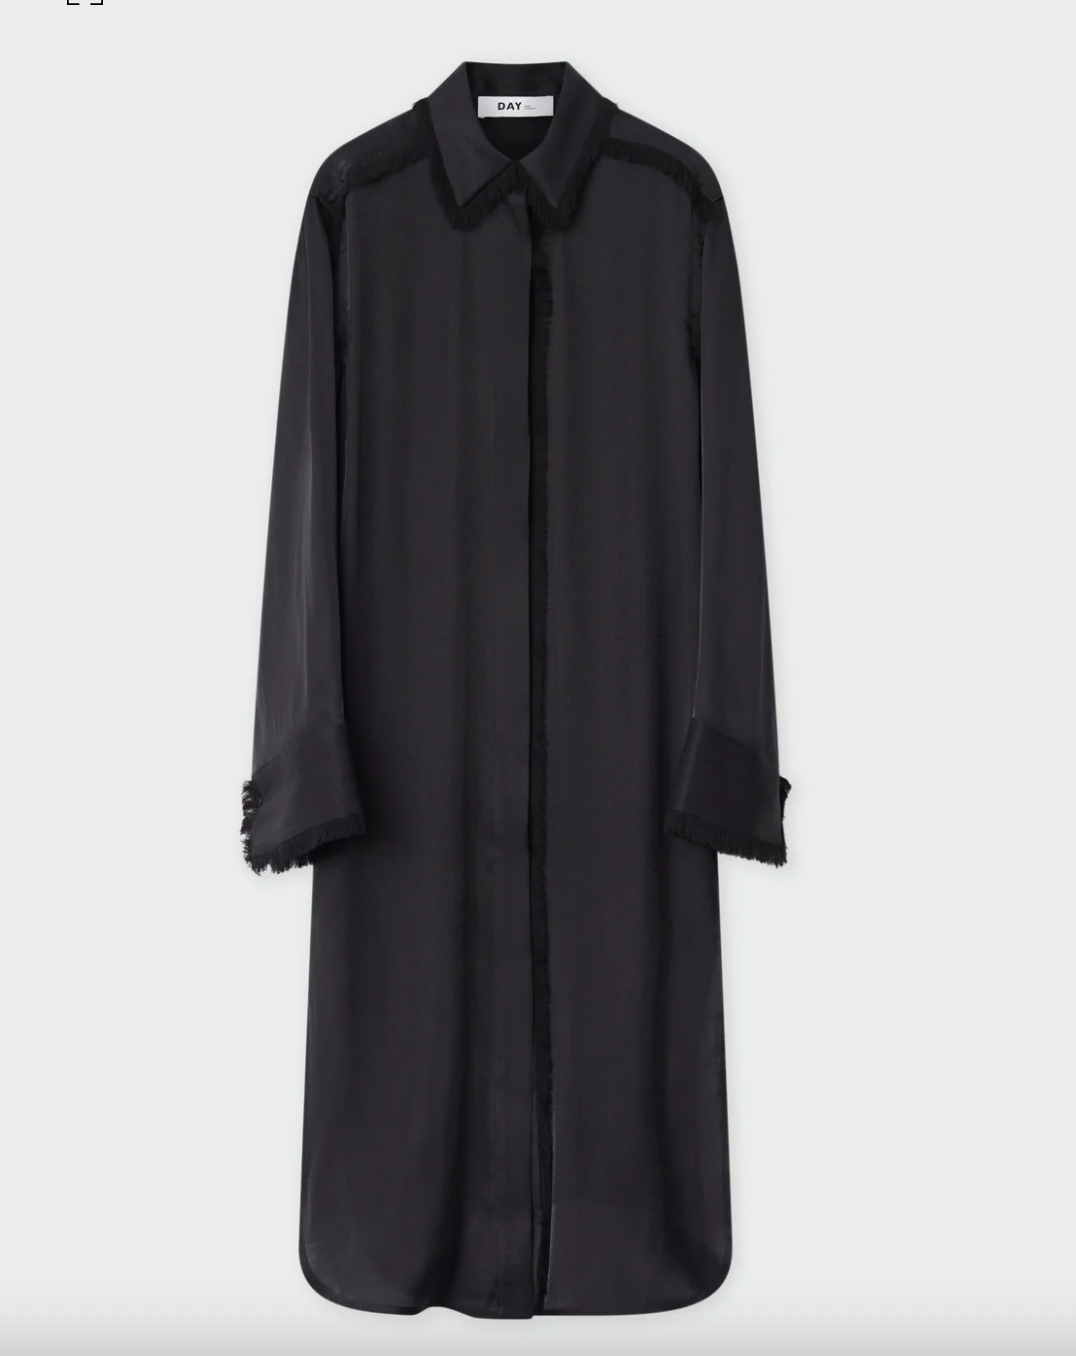 Midi shirt dress with covered full length placket classic collar long sleeves and tassel details throughout in black